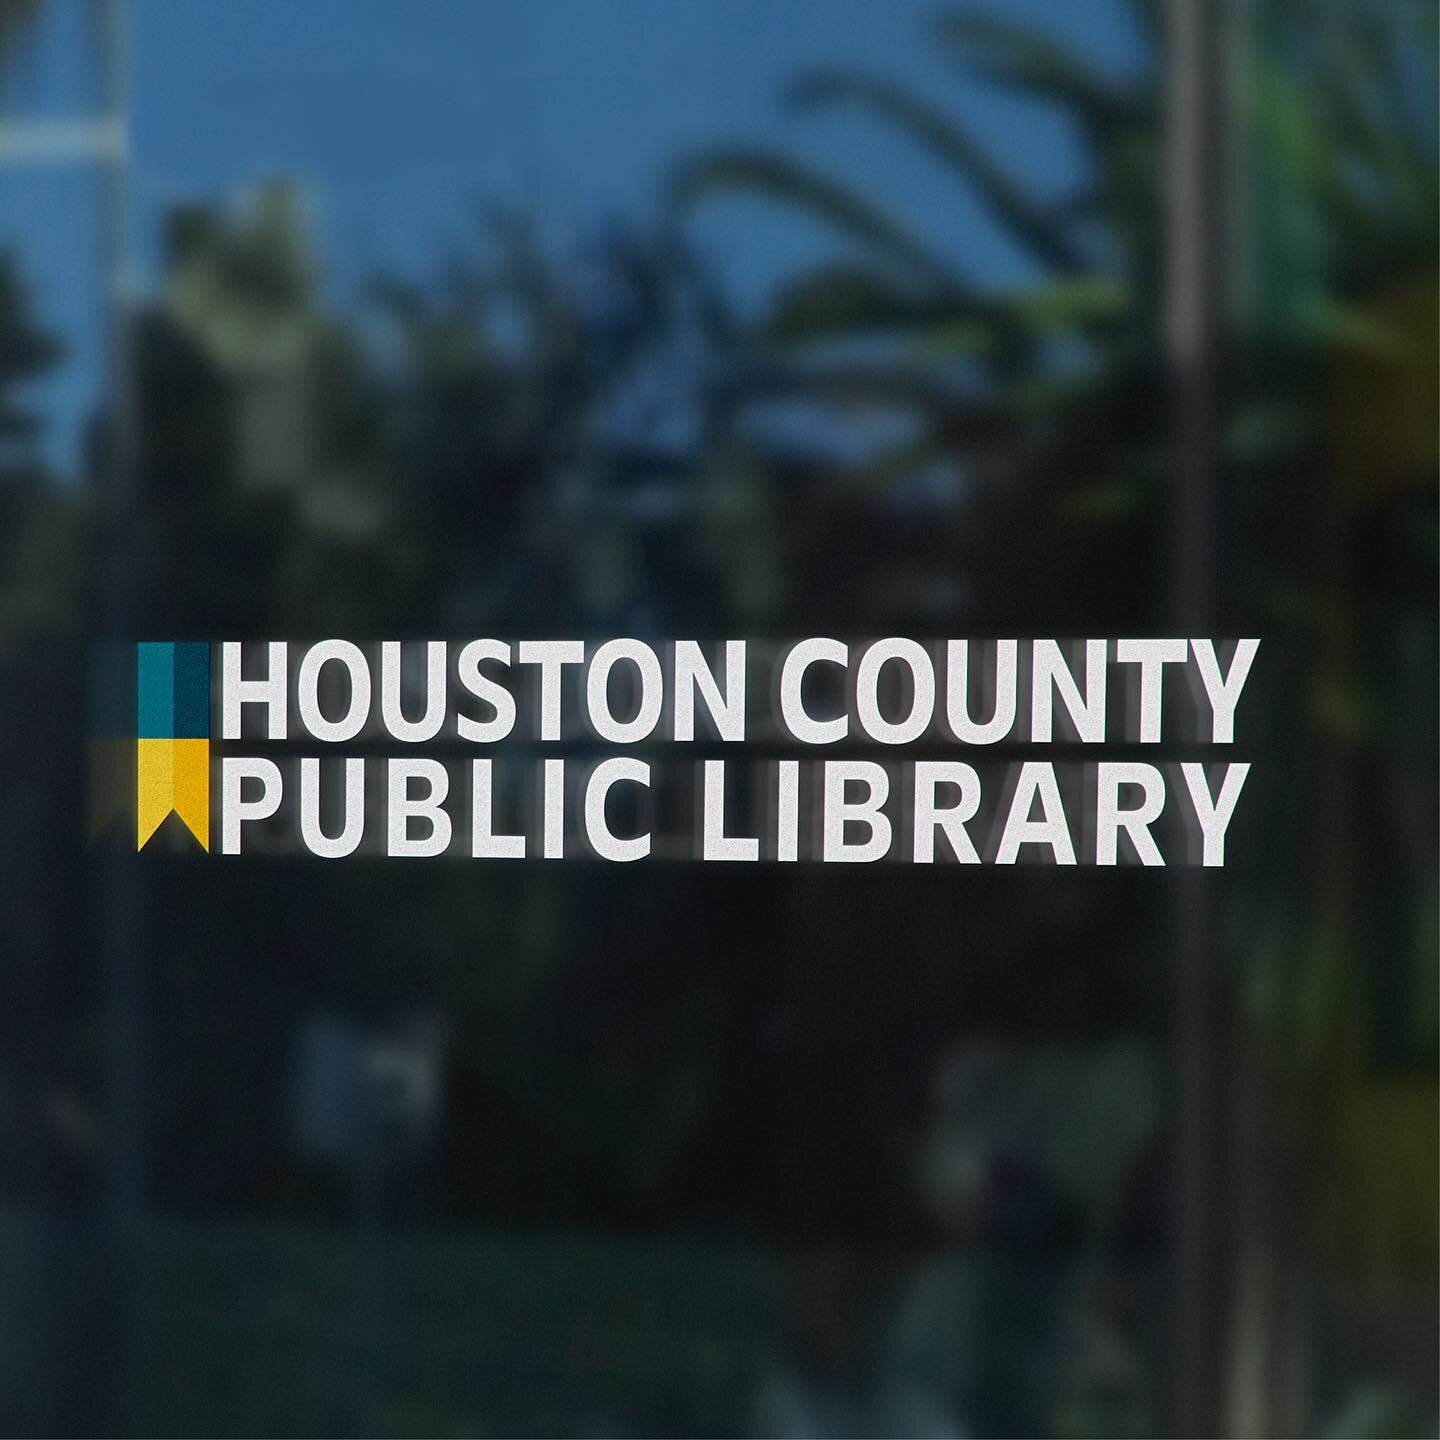 The Houston County Public Library System here in Middle Georgia is bridging yesterday and tomorrow with information and discovery ✨

We worked with their team to create branding that not only reflected their mission, but could identify their system a